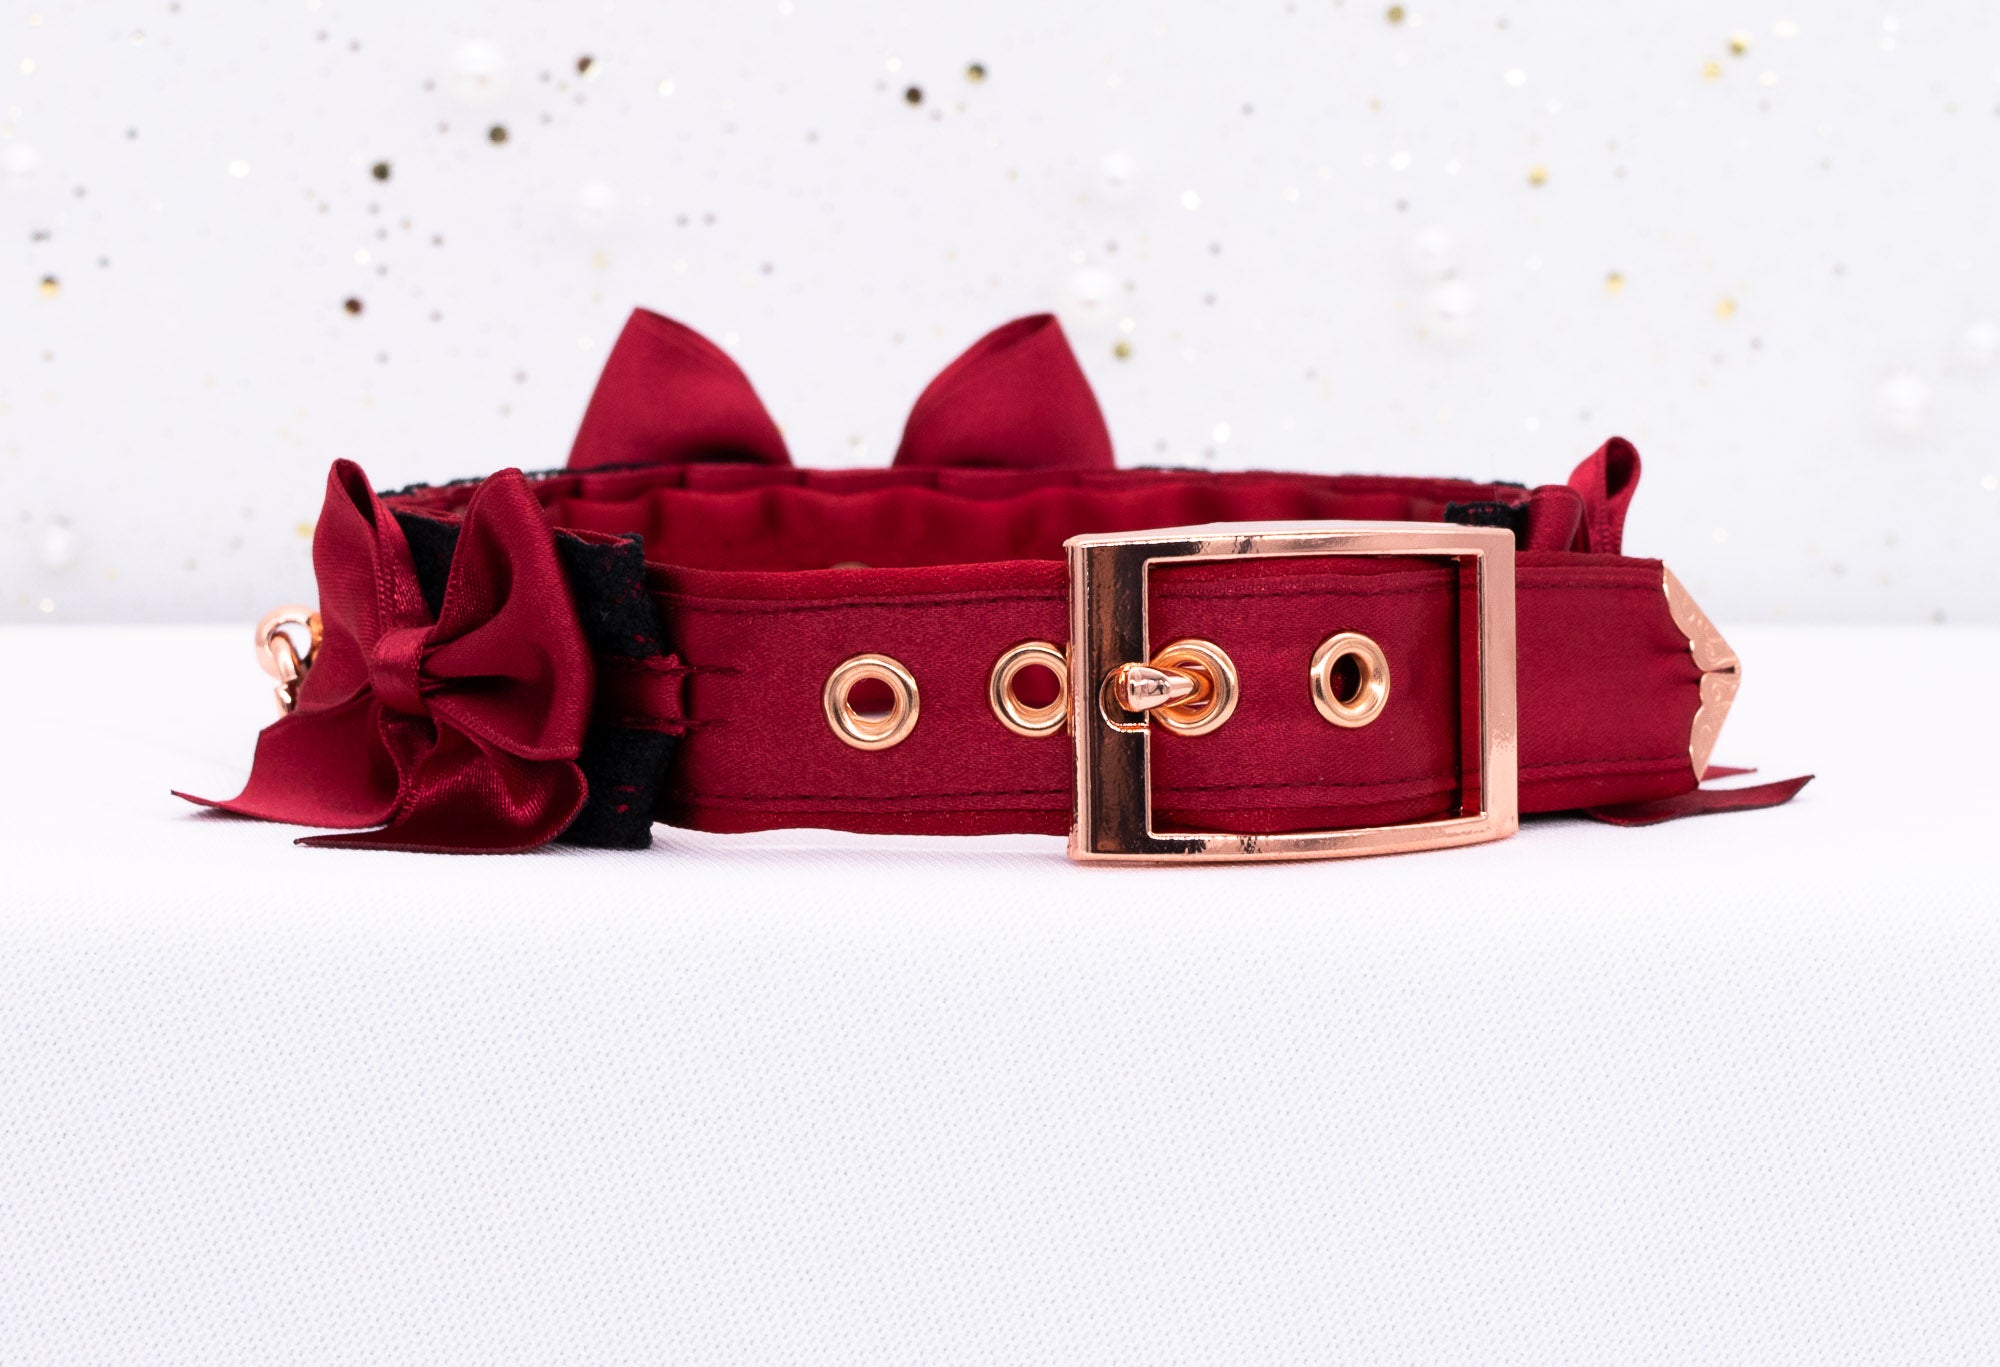 Crimson and Black Lace Collar and Leash Set in Rose Gold